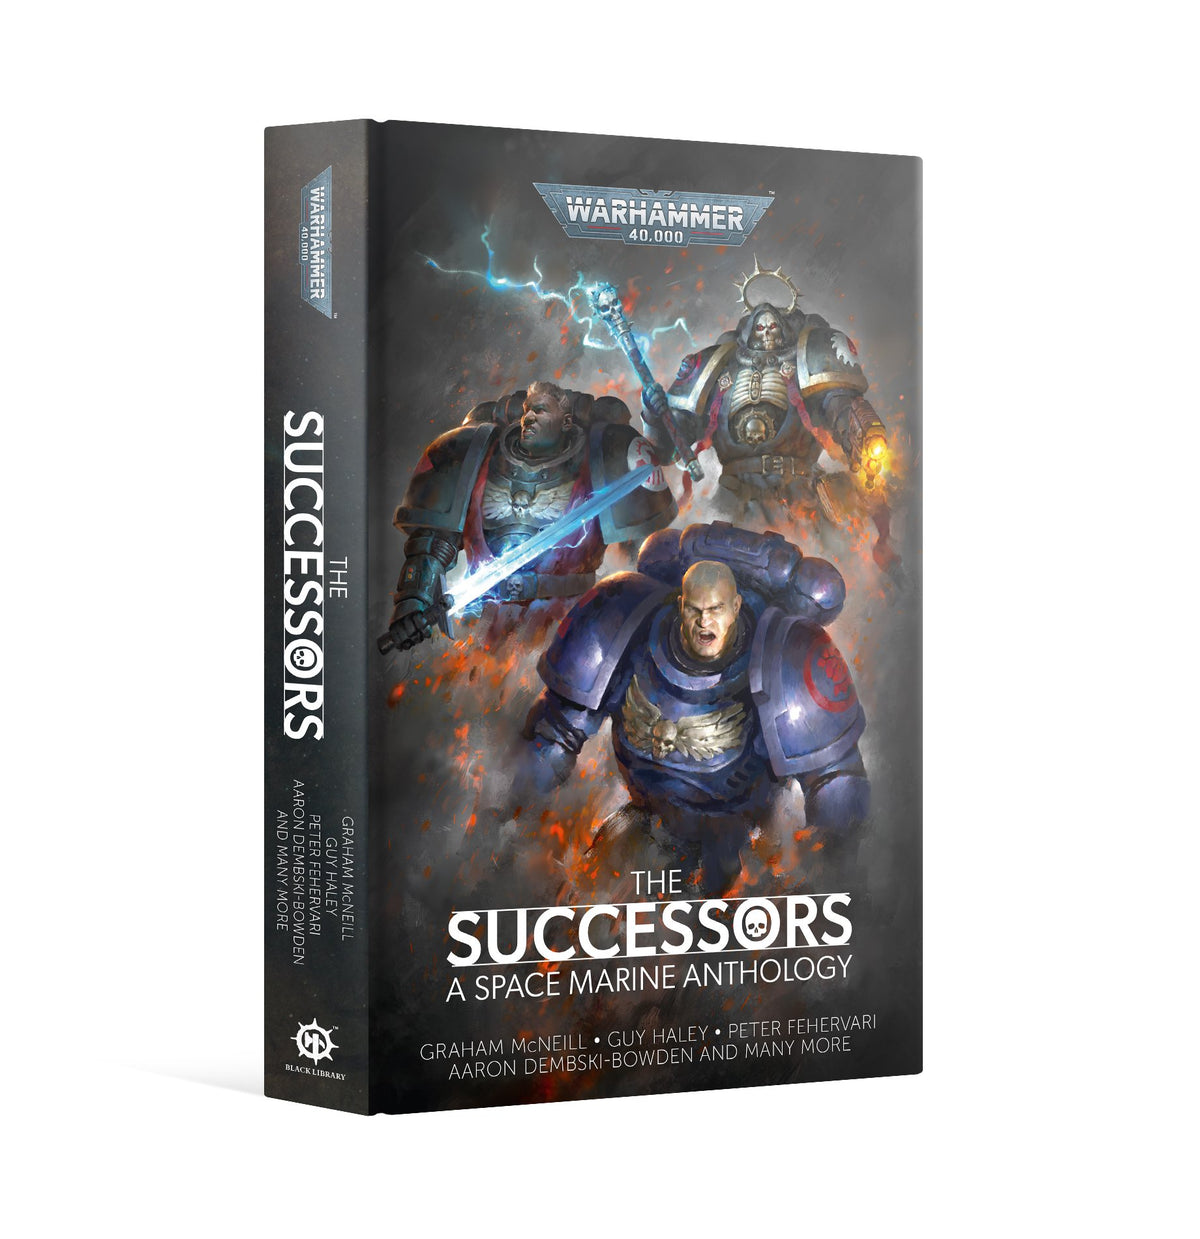 The Successors: A Space Marine Anthology (Novel HB)